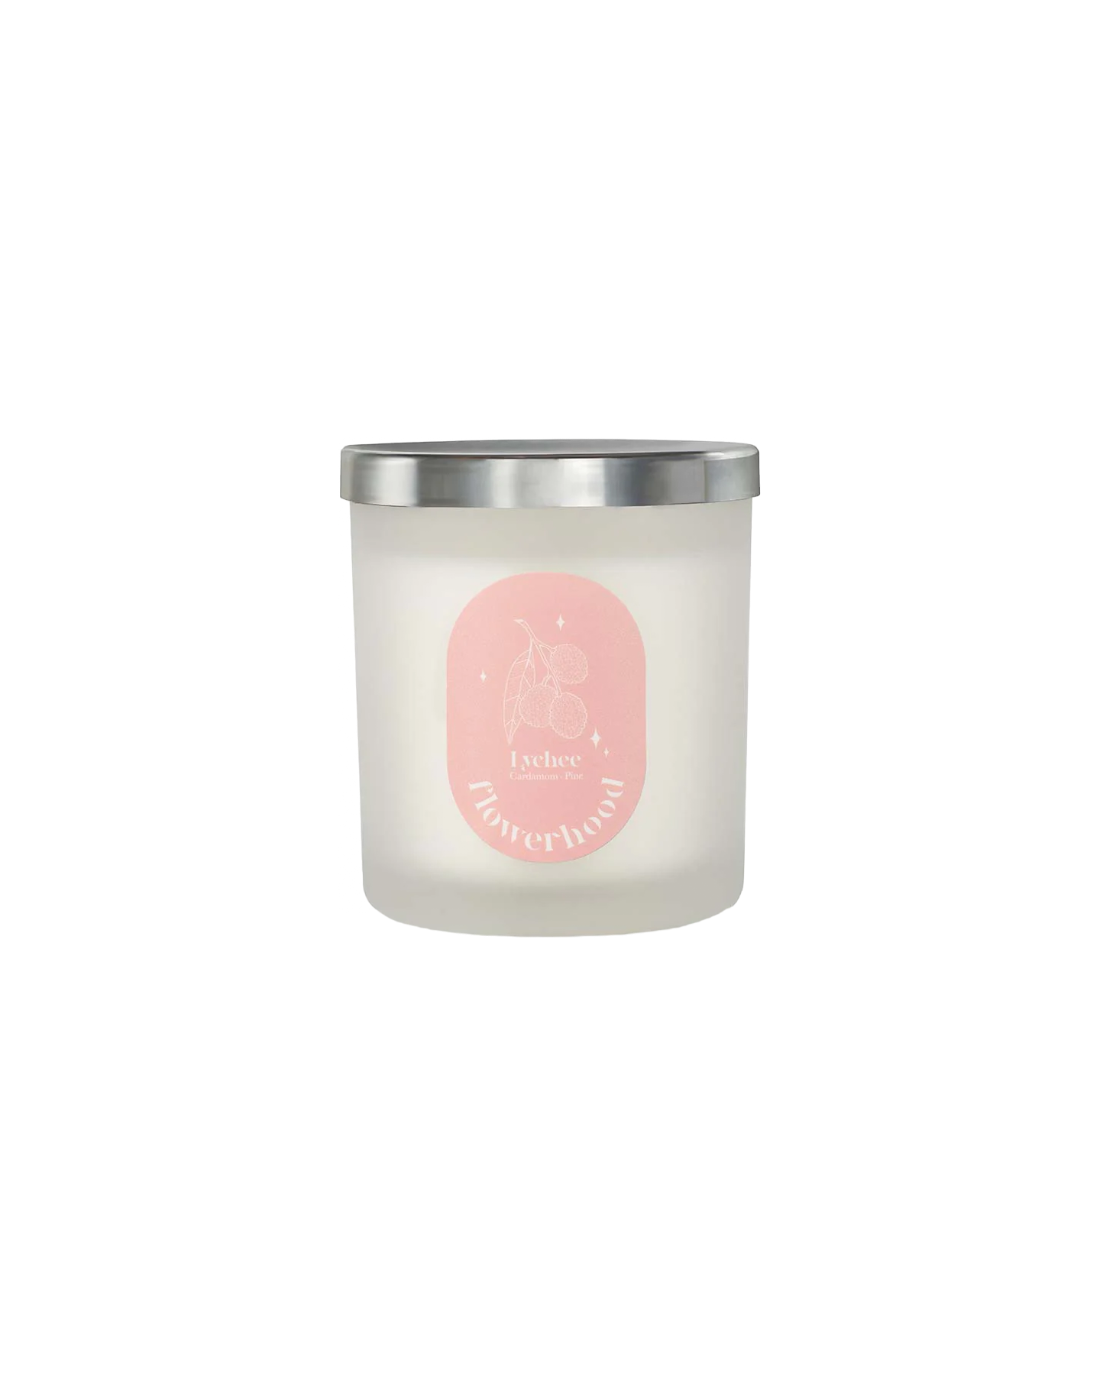 Lychee Scented Candle